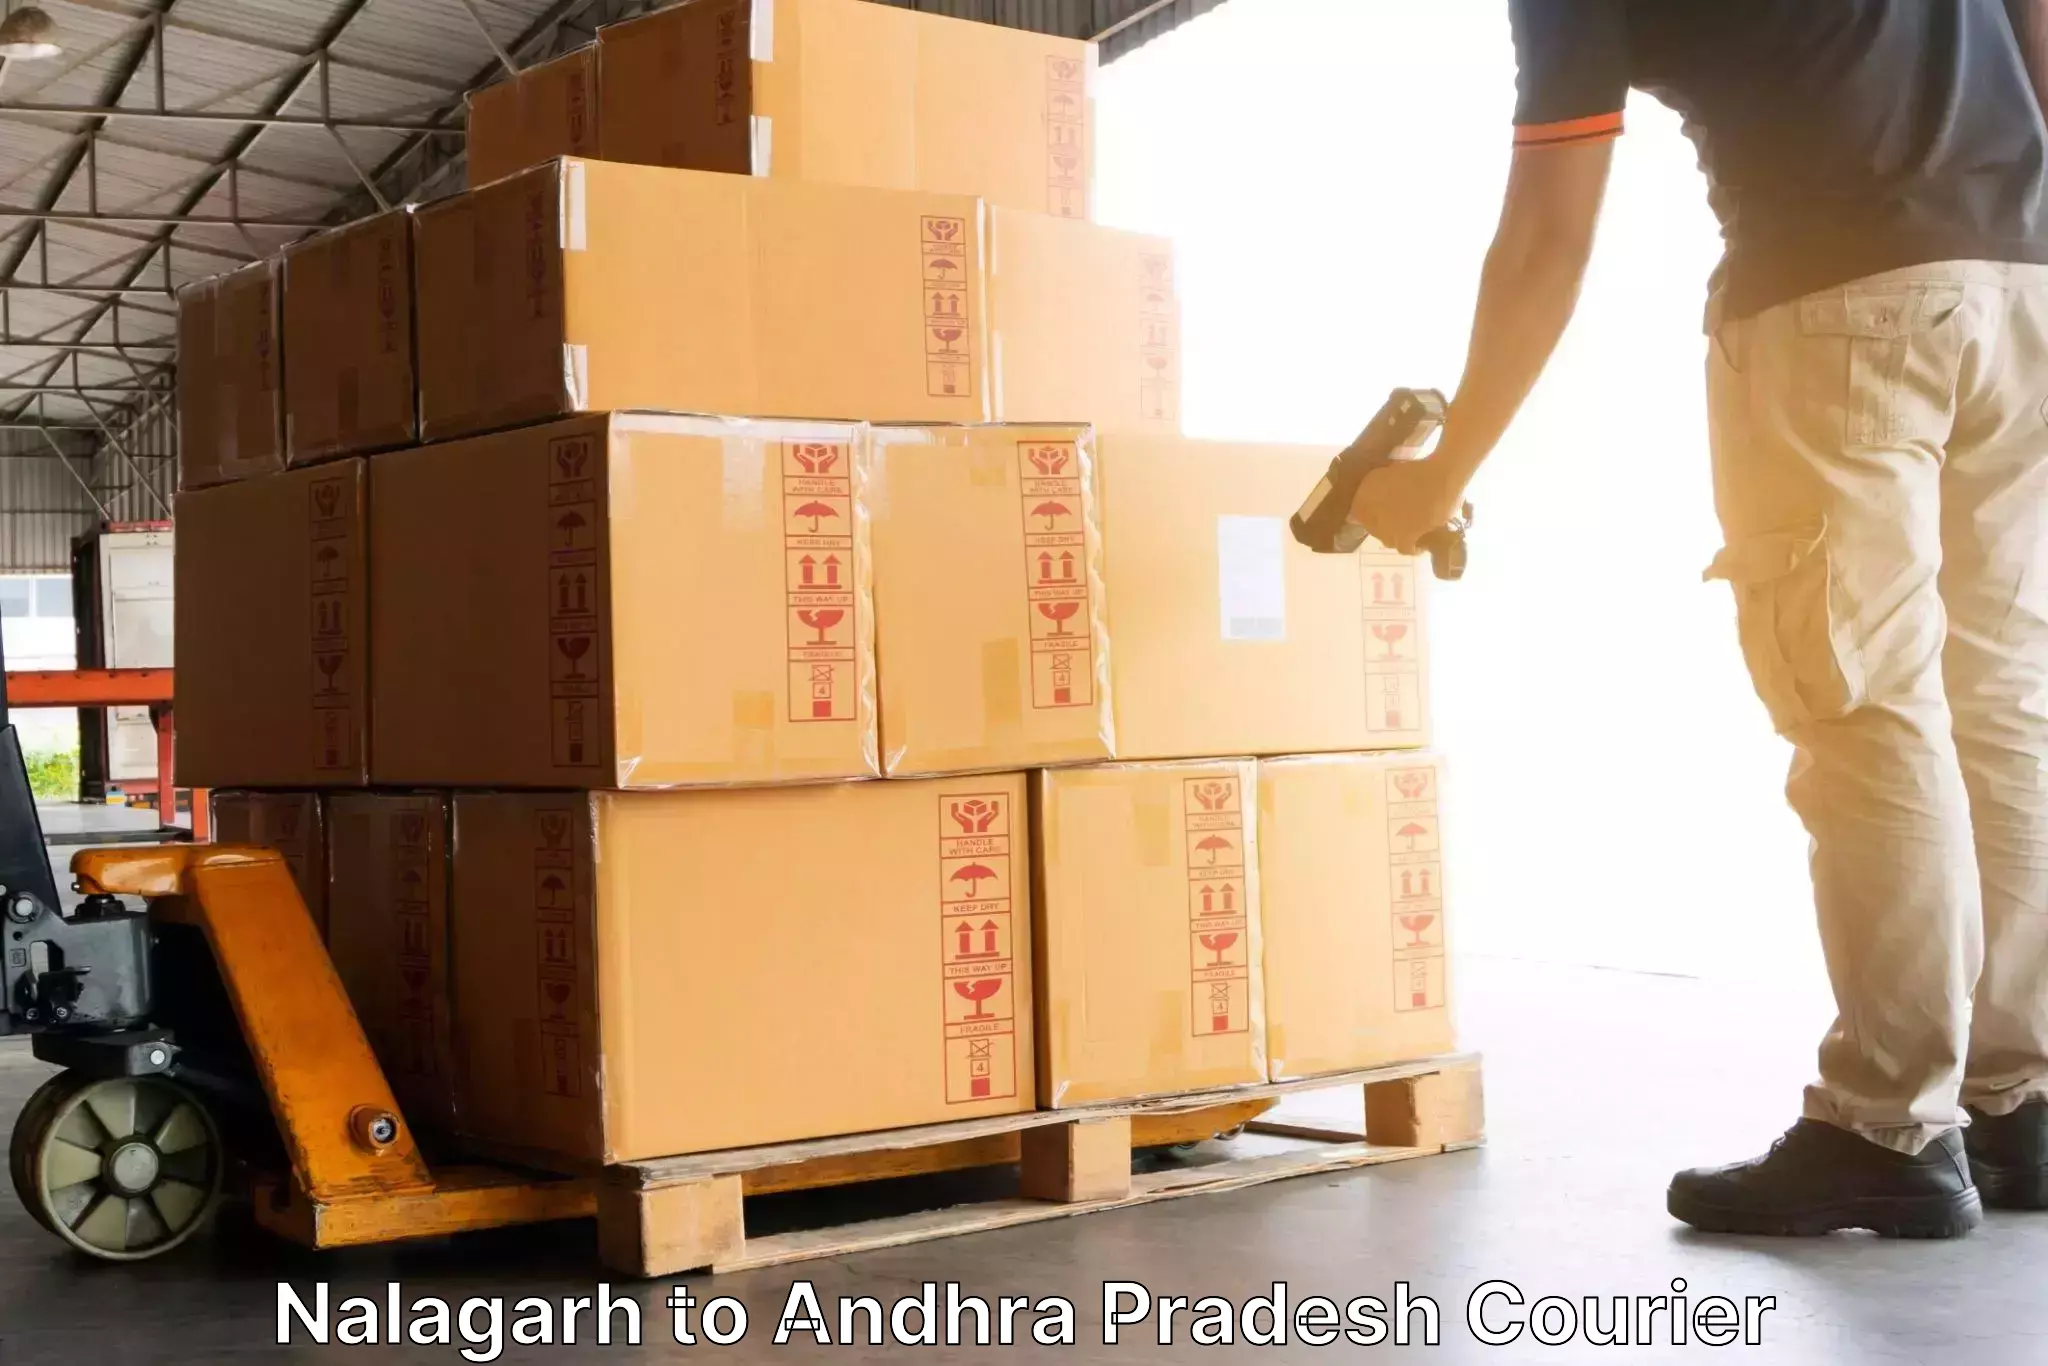 Speedy delivery service in Nalagarh to Pathapatnam